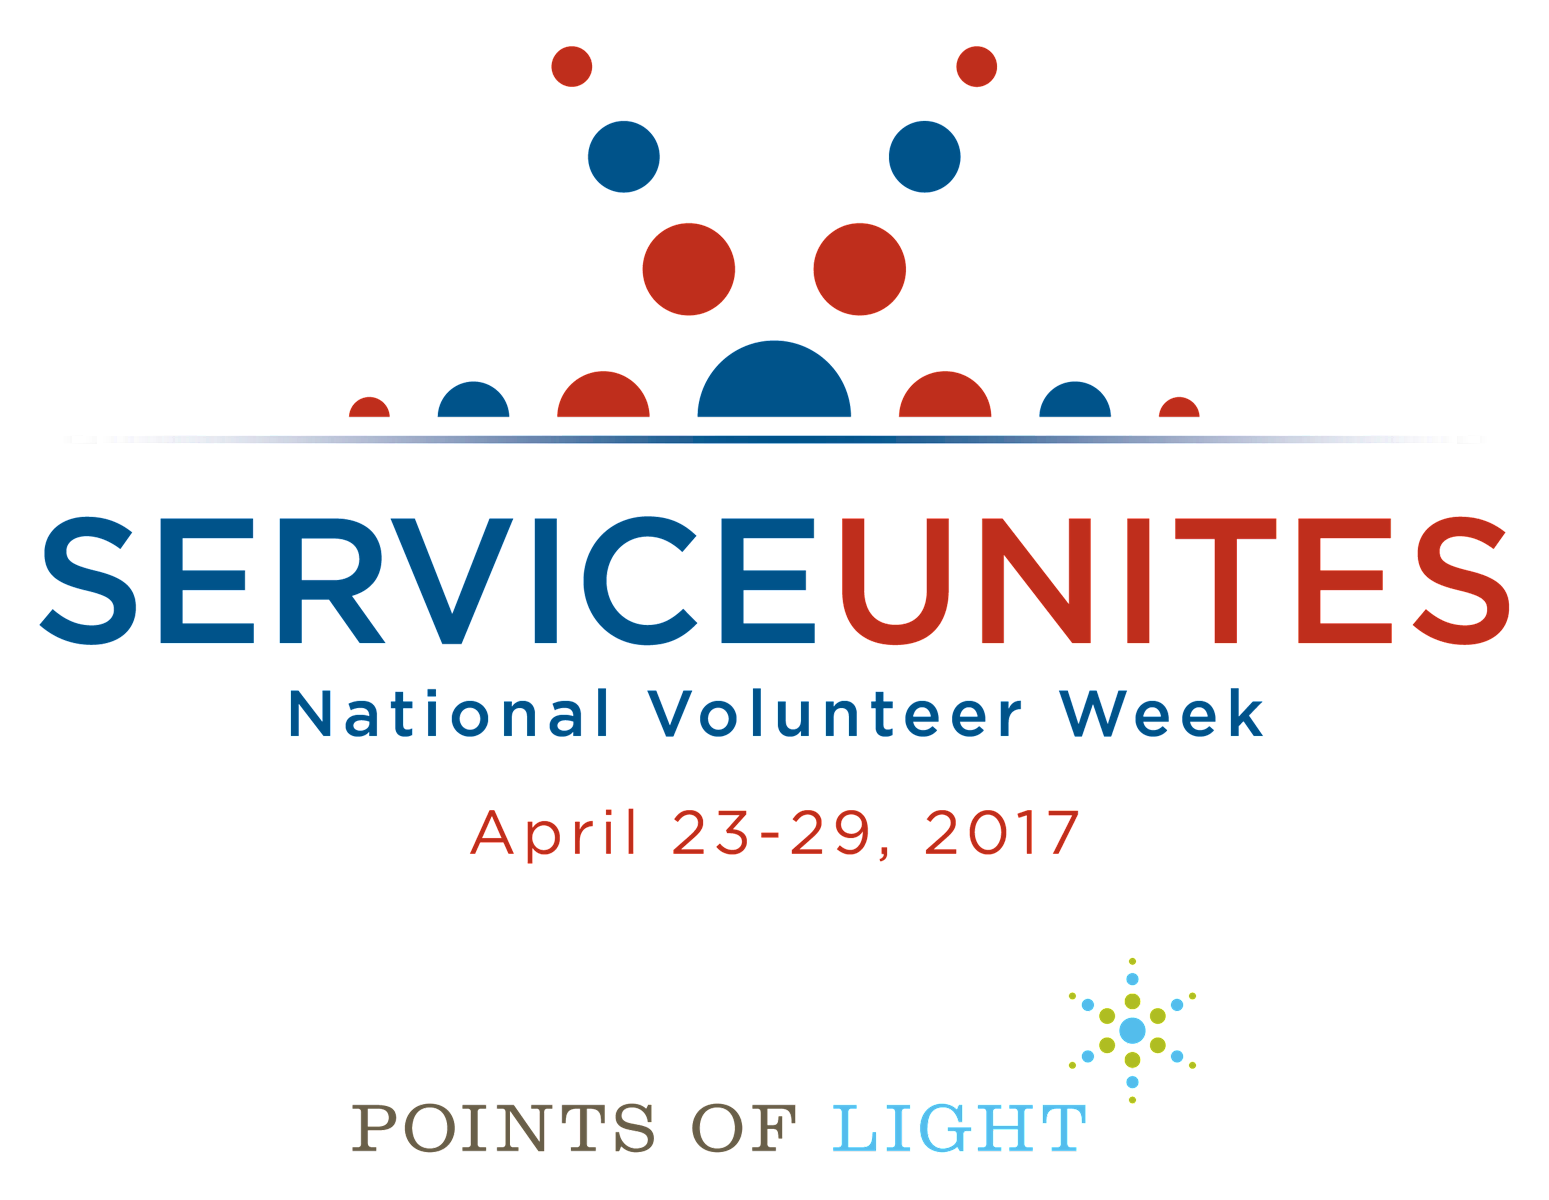 Service unites is the theme for National Volunteer Week 2017